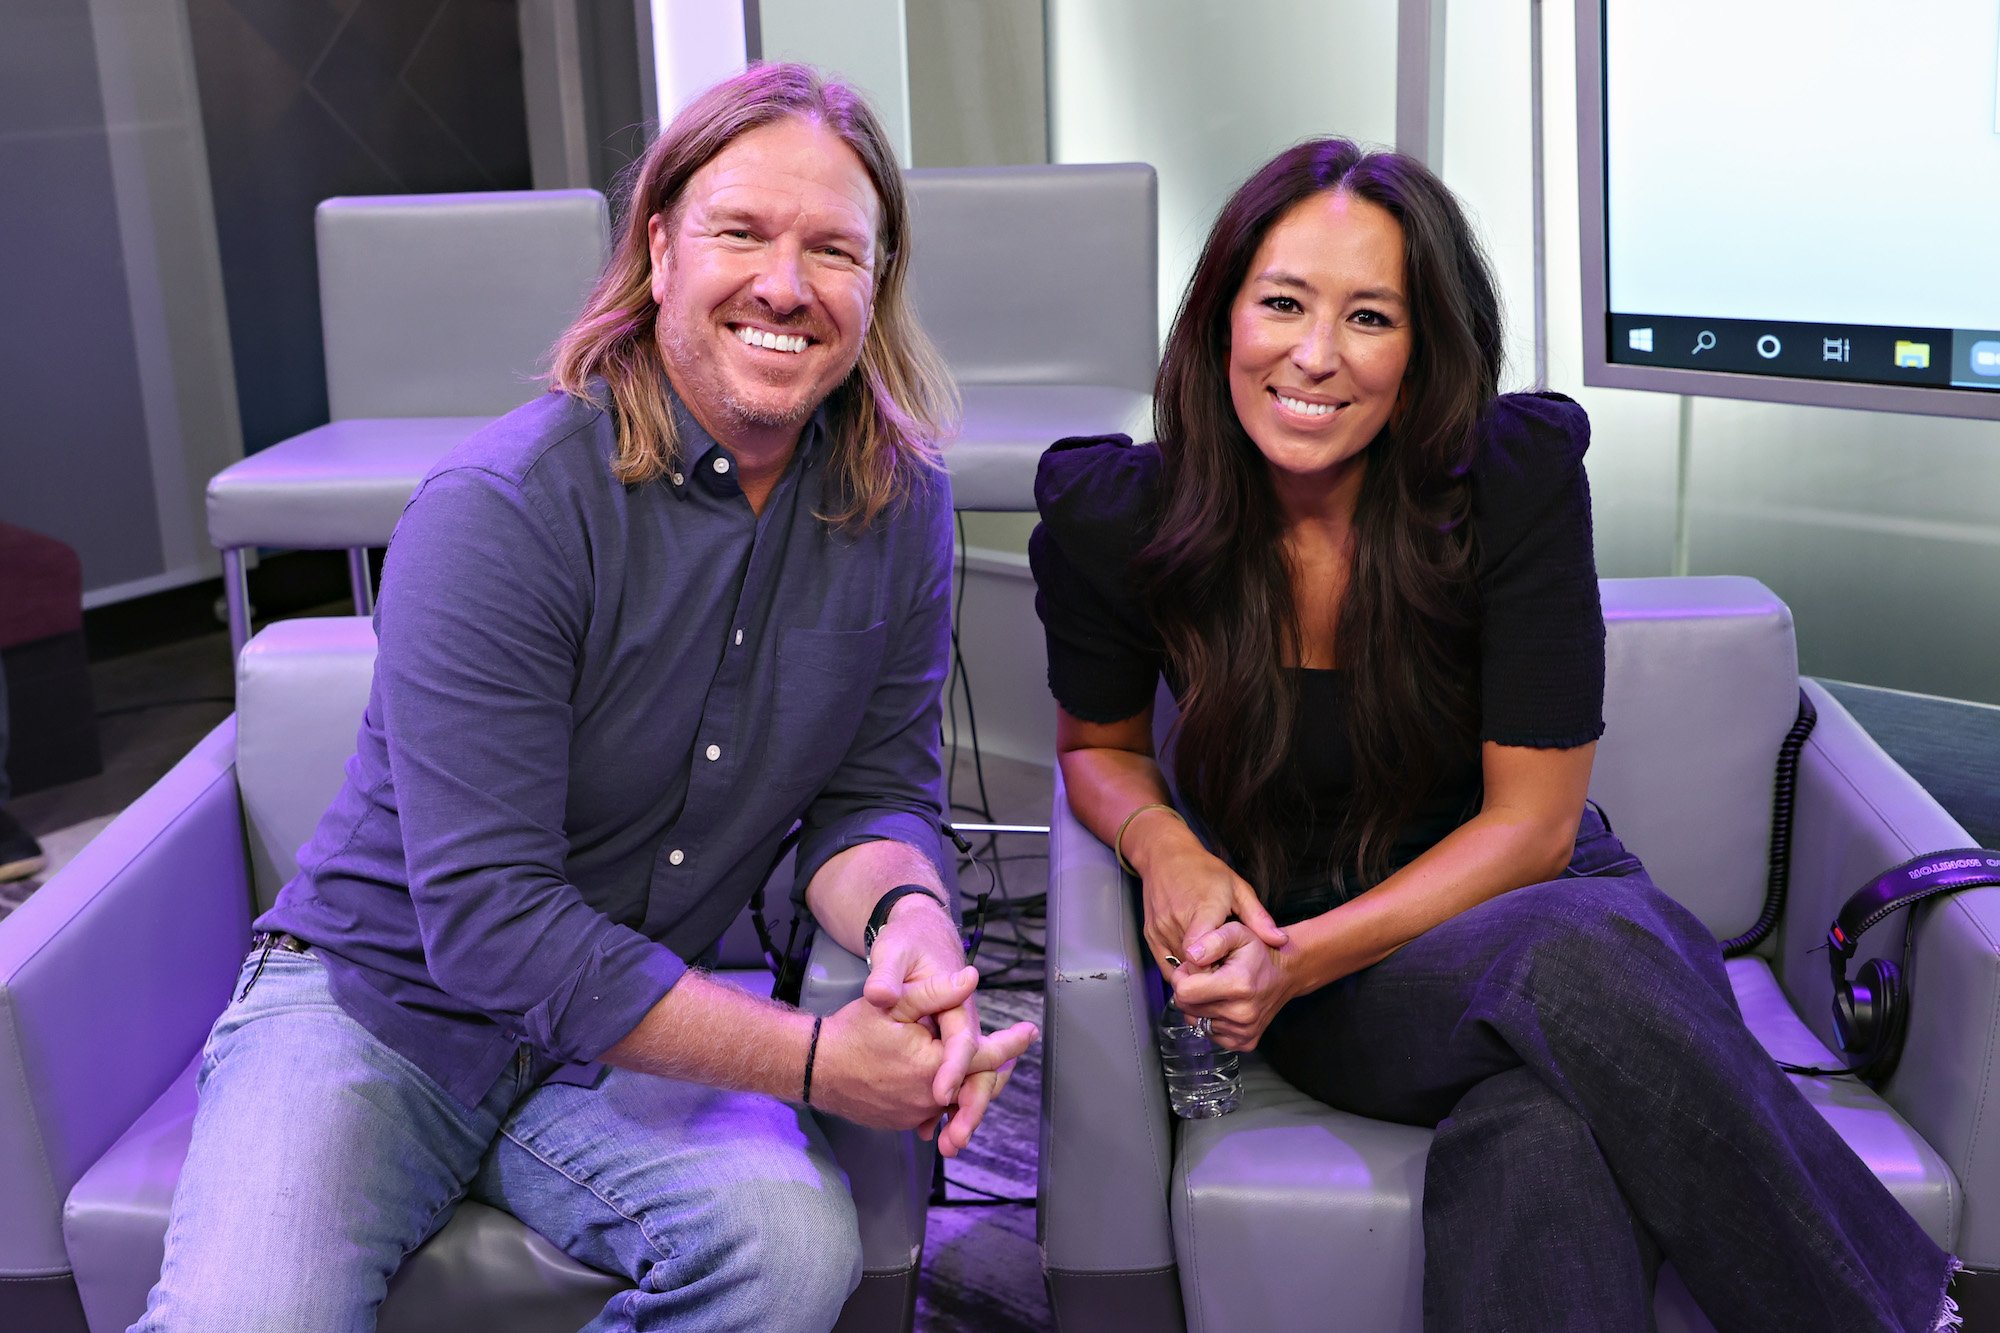 Chip and Joanna Gaines smile while seated during an appearance on the TODAY Show radio event in July 2021